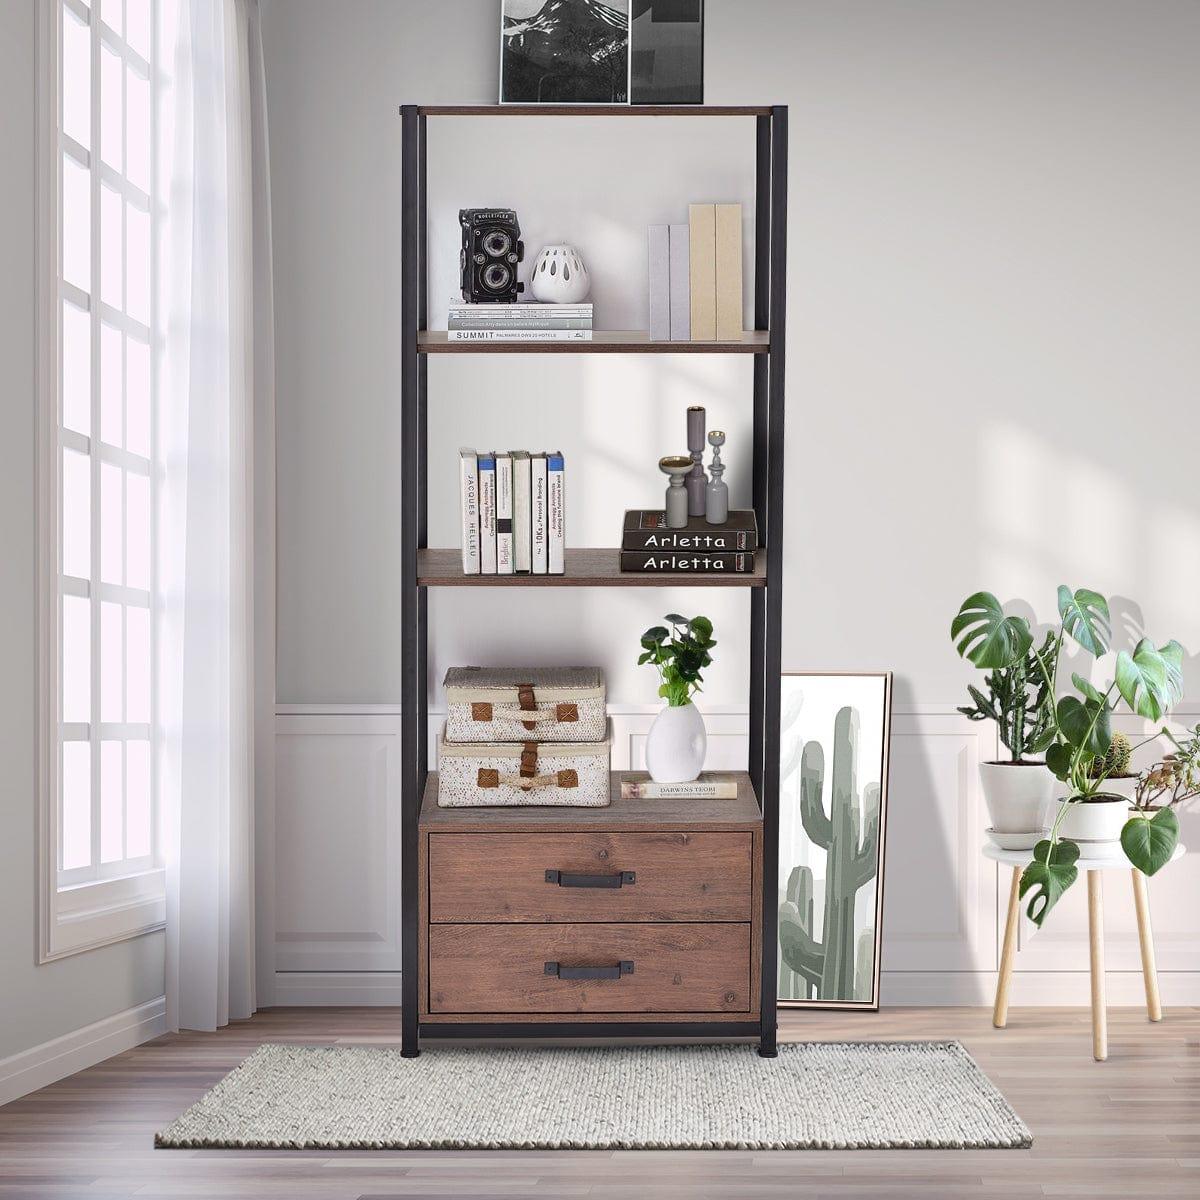 Shop Home Office 4-Tier Bookshelf, Simple Industrial Bookcase Standing Shelf Unit Storage Organizer with 4 Open Storage Shelves and Two Drawers, Brown Mademoiselle Home Decor